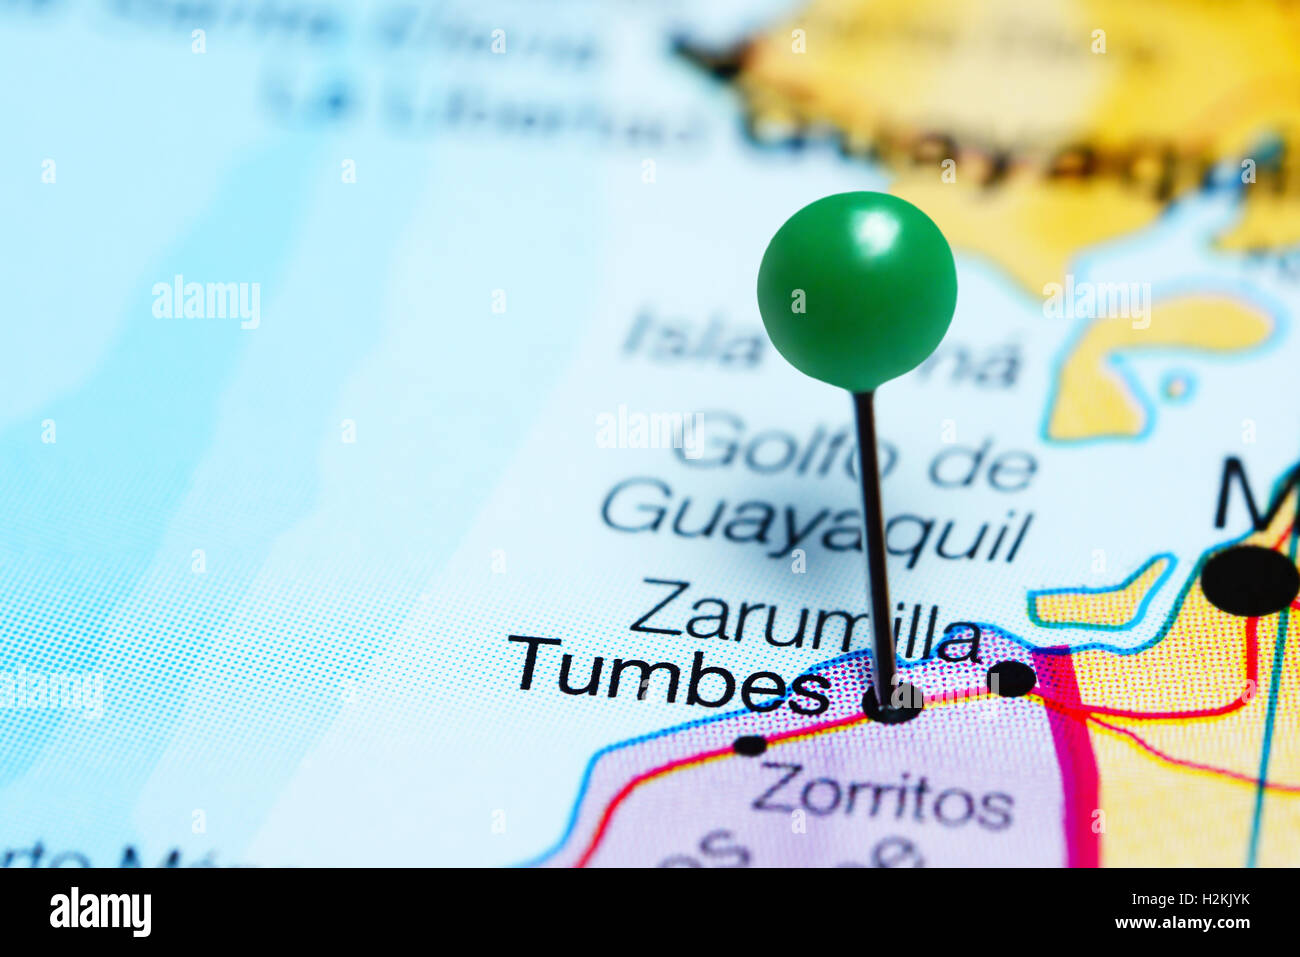 Tumbes pinned on a map of Peru Stock Photo